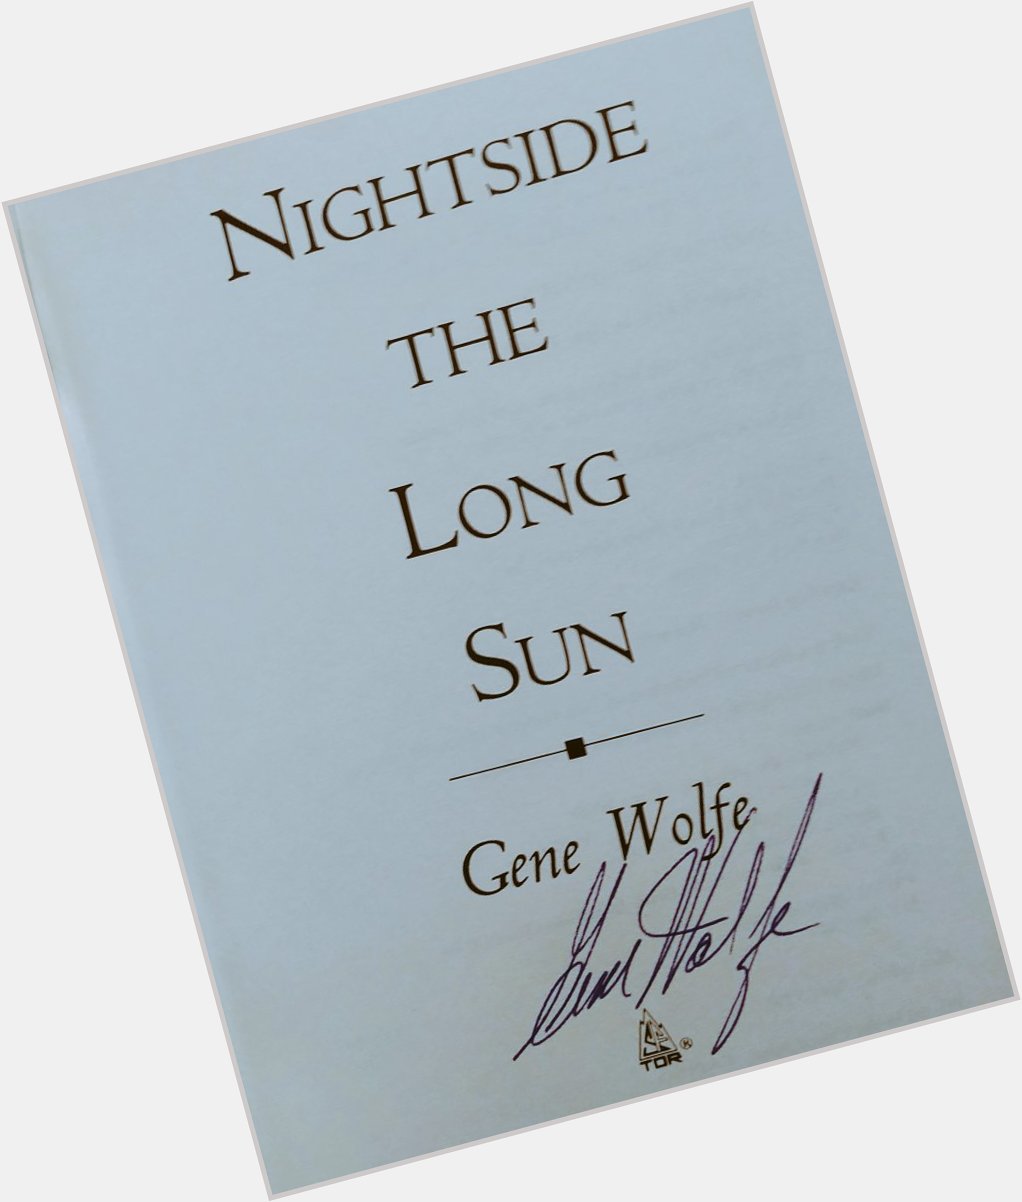 Happy Birthday to Gene Wolfe. The Book of the Long Sun remains one of my top reads. 